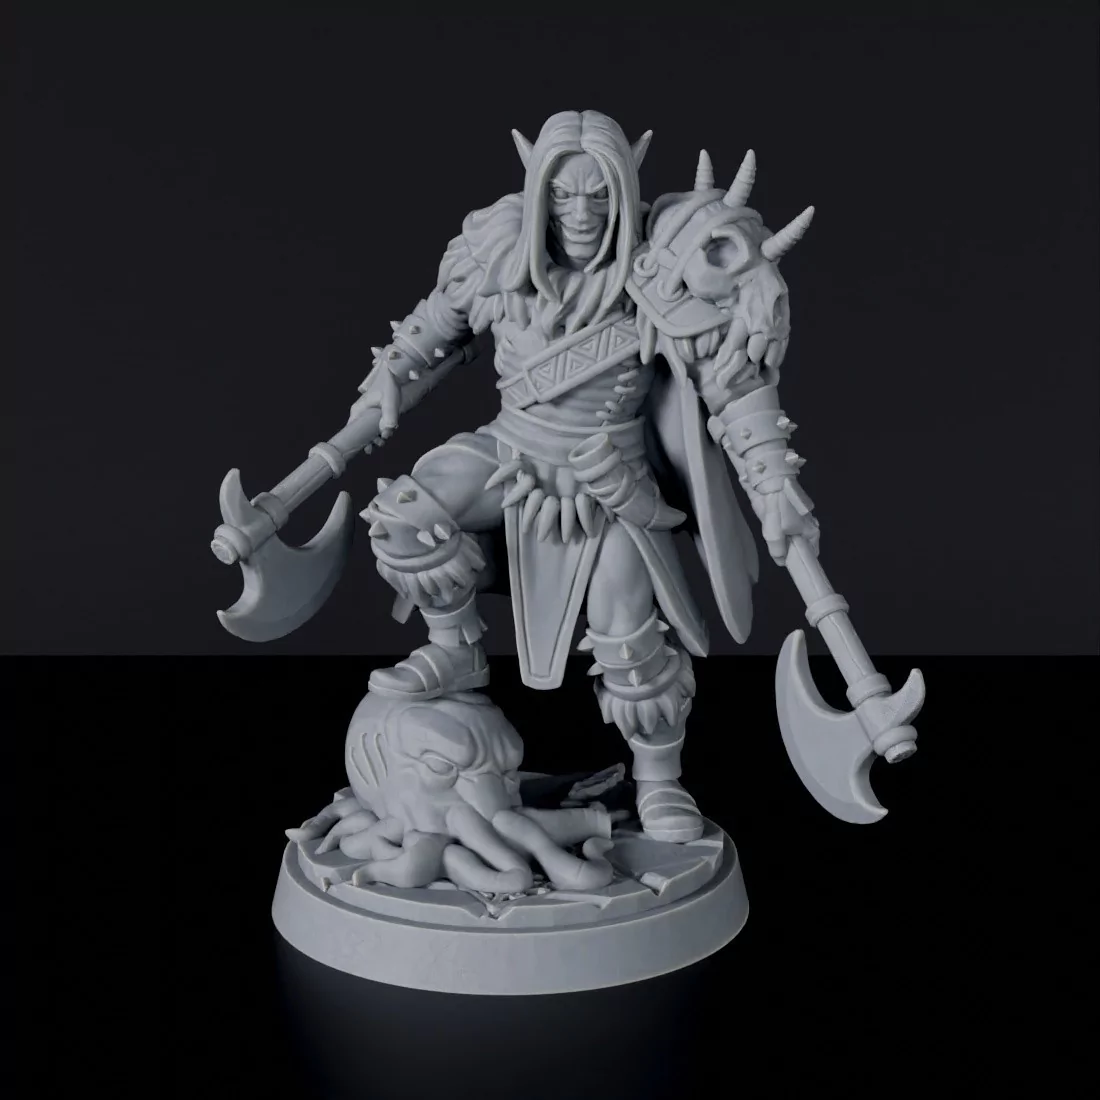 Miniature of Elf Male Barbarian with axes and armor for fantasy tabletop role-playing games